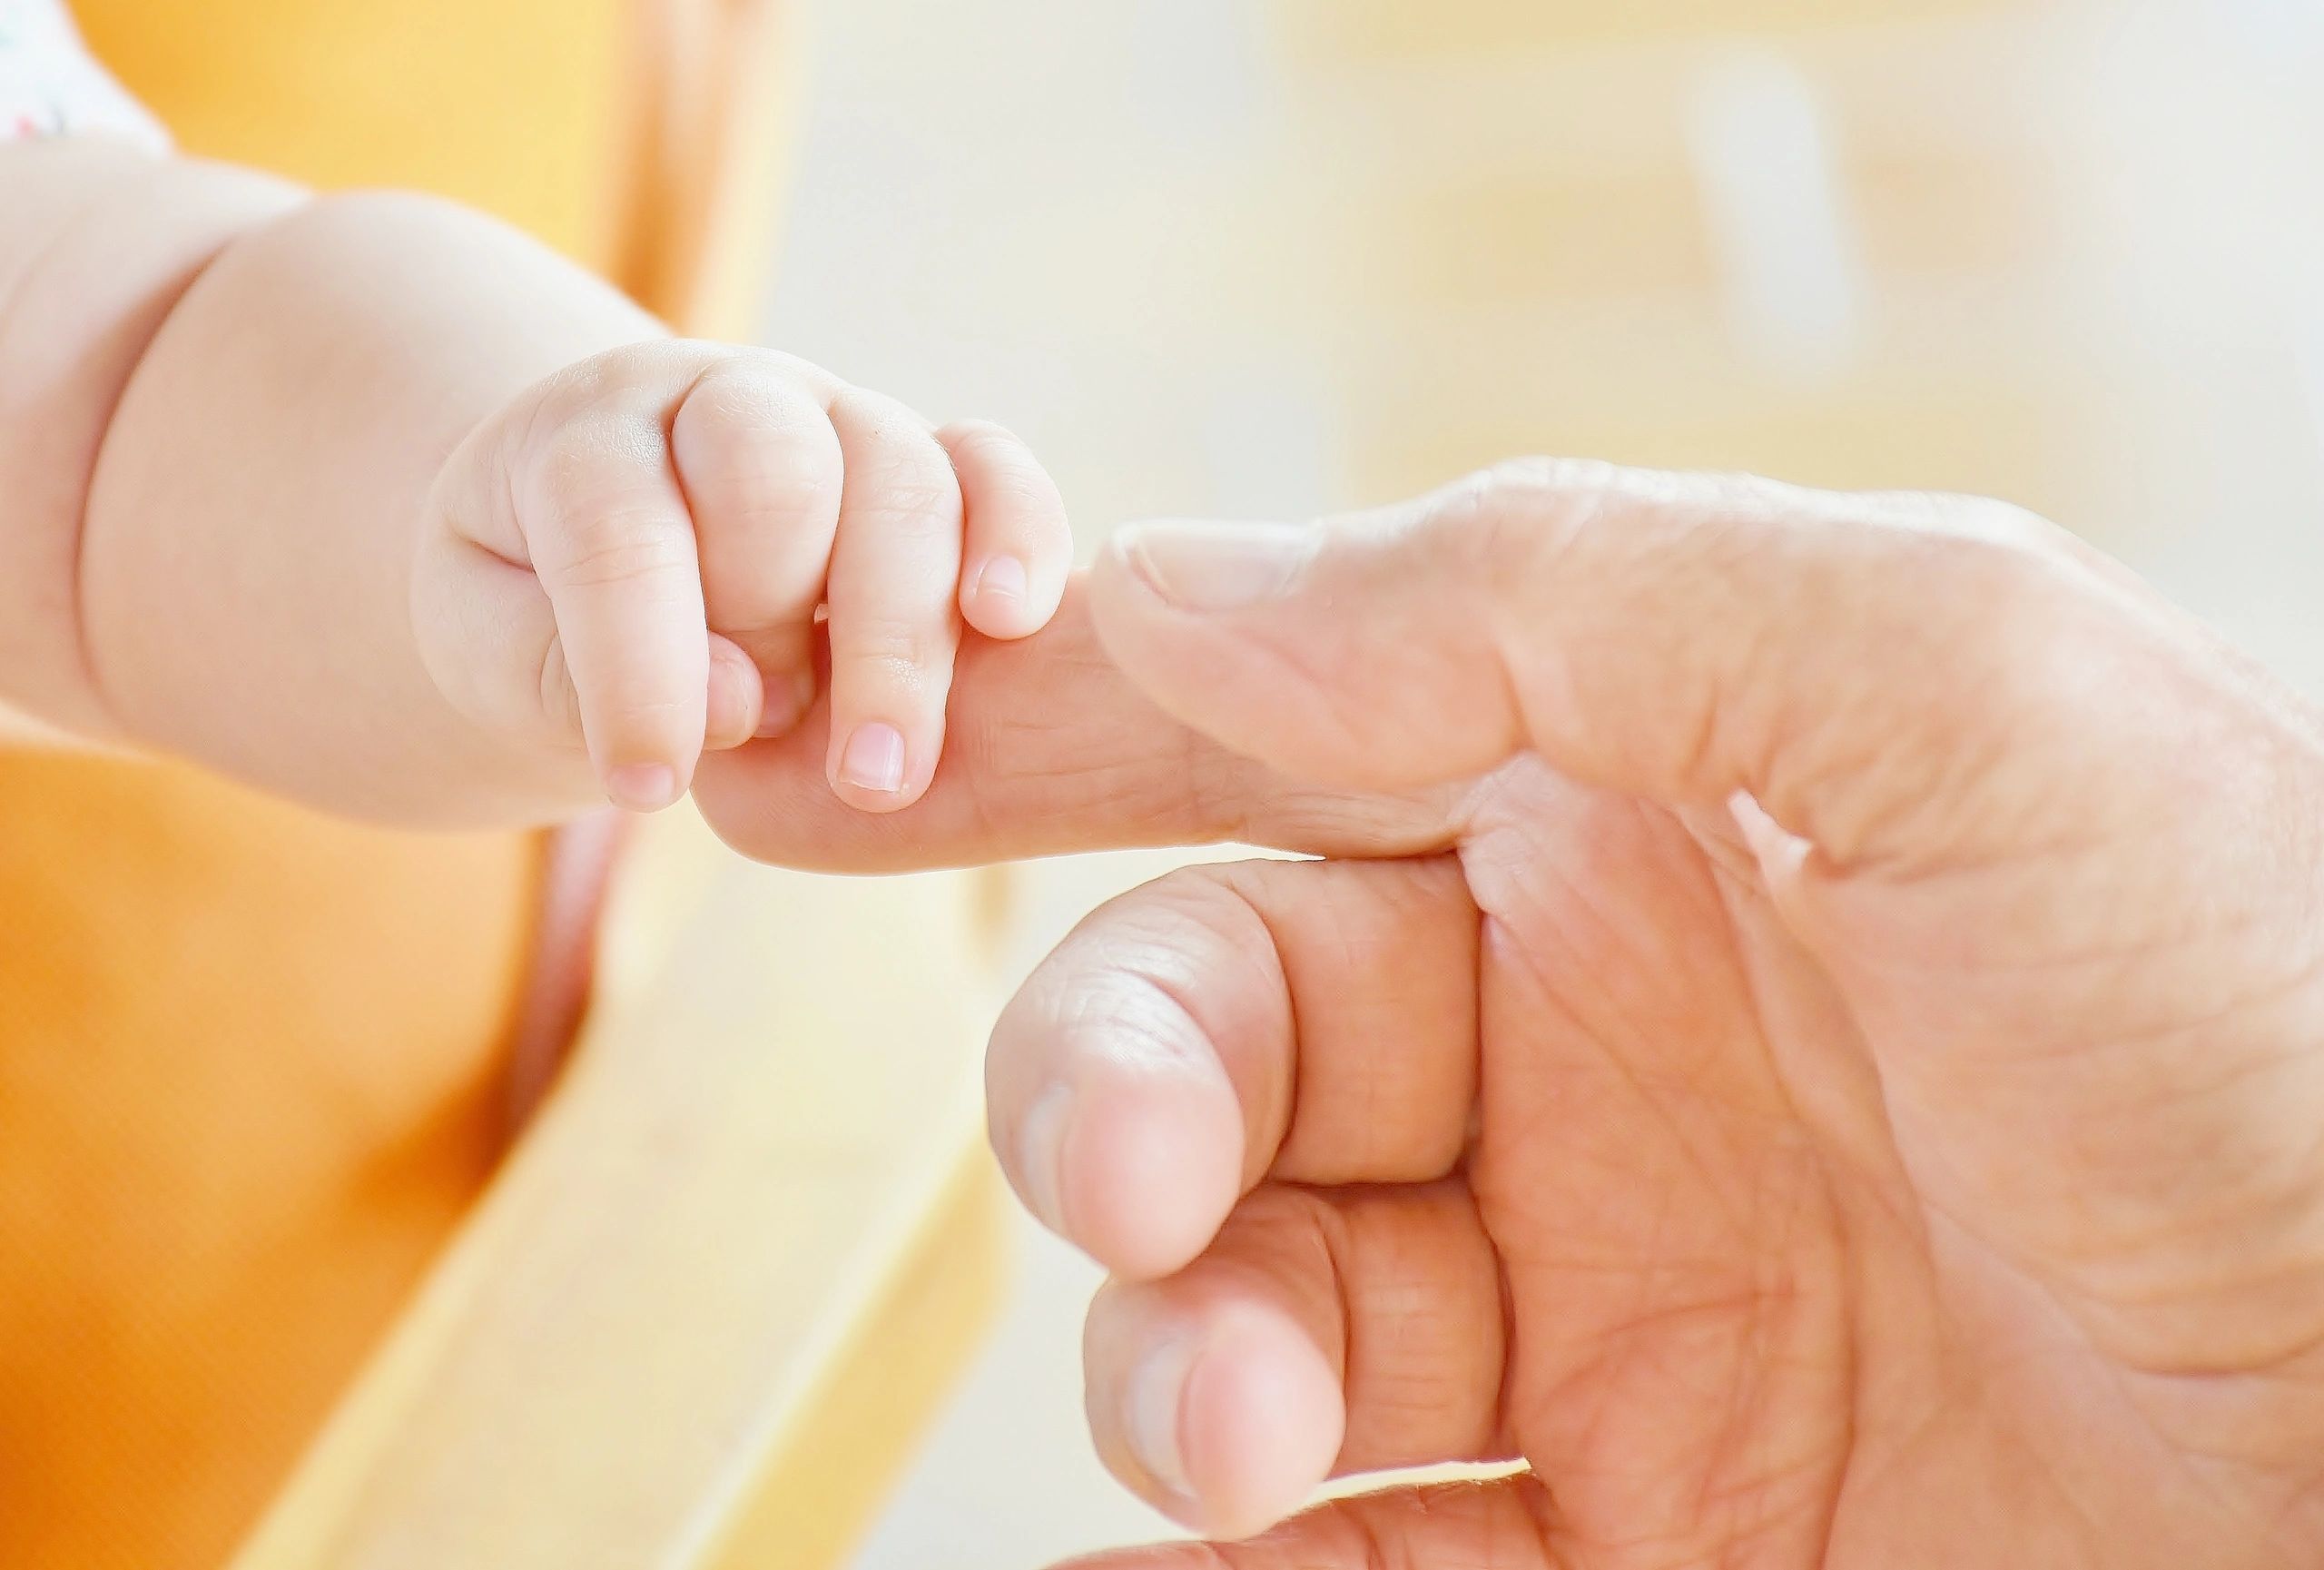 Infant hand gripping index finger on hand of an aged person